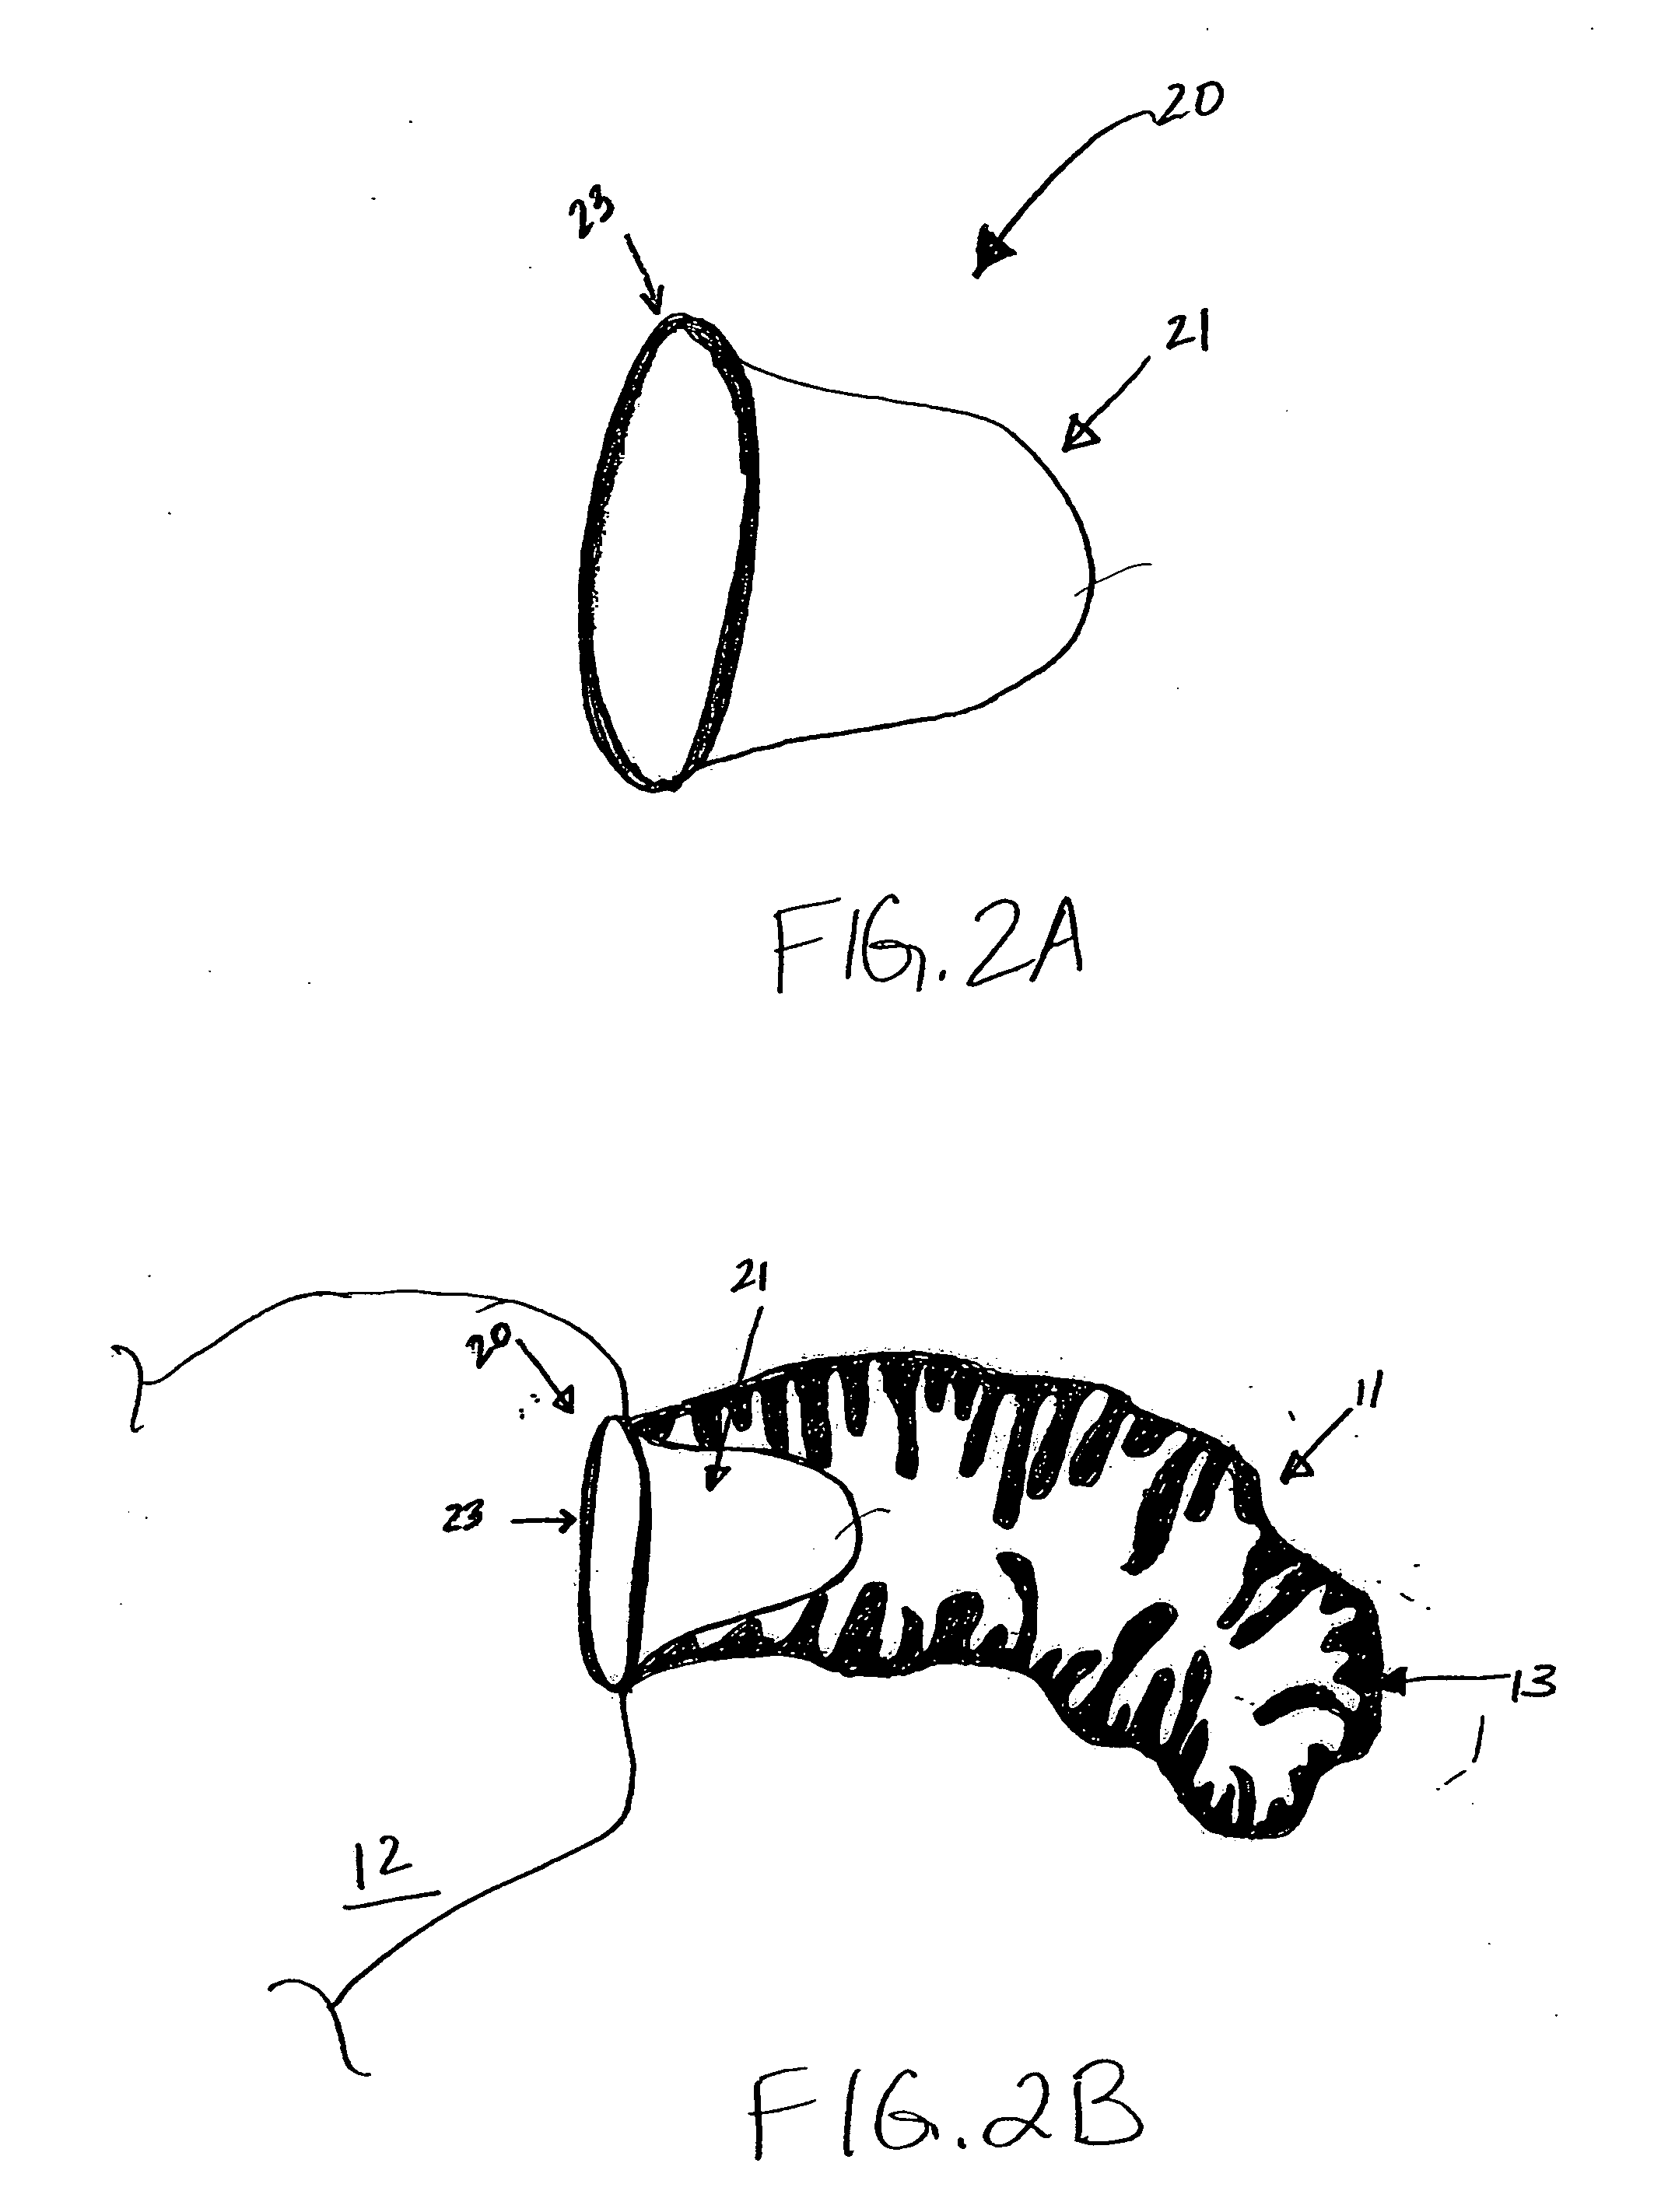 Device and methods for preventing formation of thrombi in the left atrial appendage